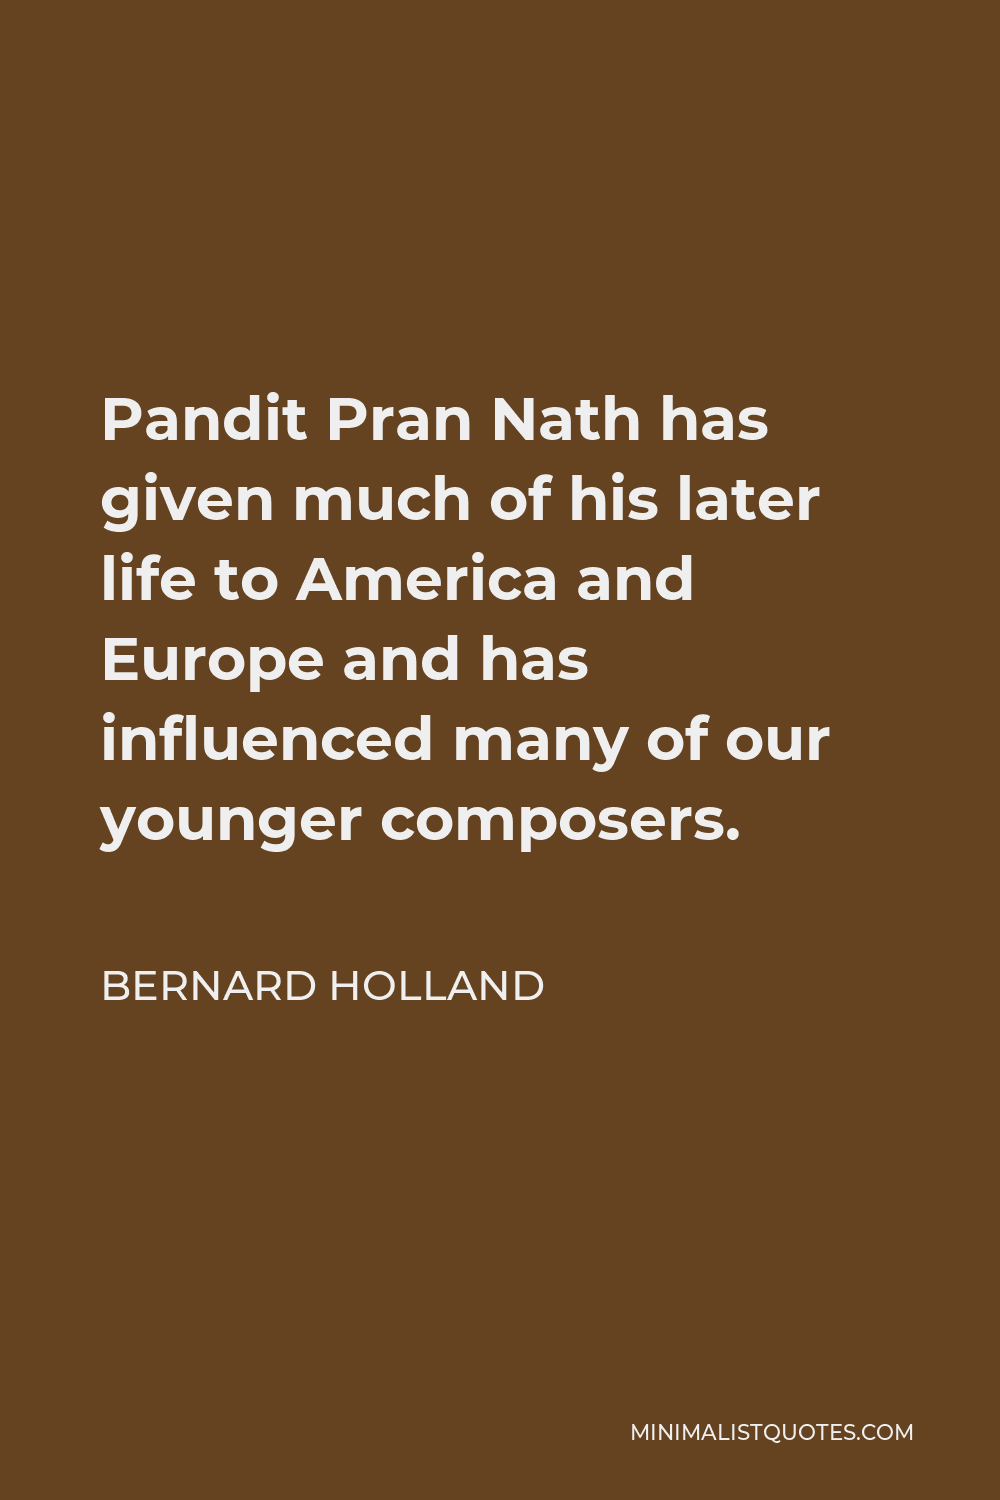 Bernard Holland Quote - Pandit Pran Nath has given much of his later life to America and Europe and has influenced many of our younger composers.